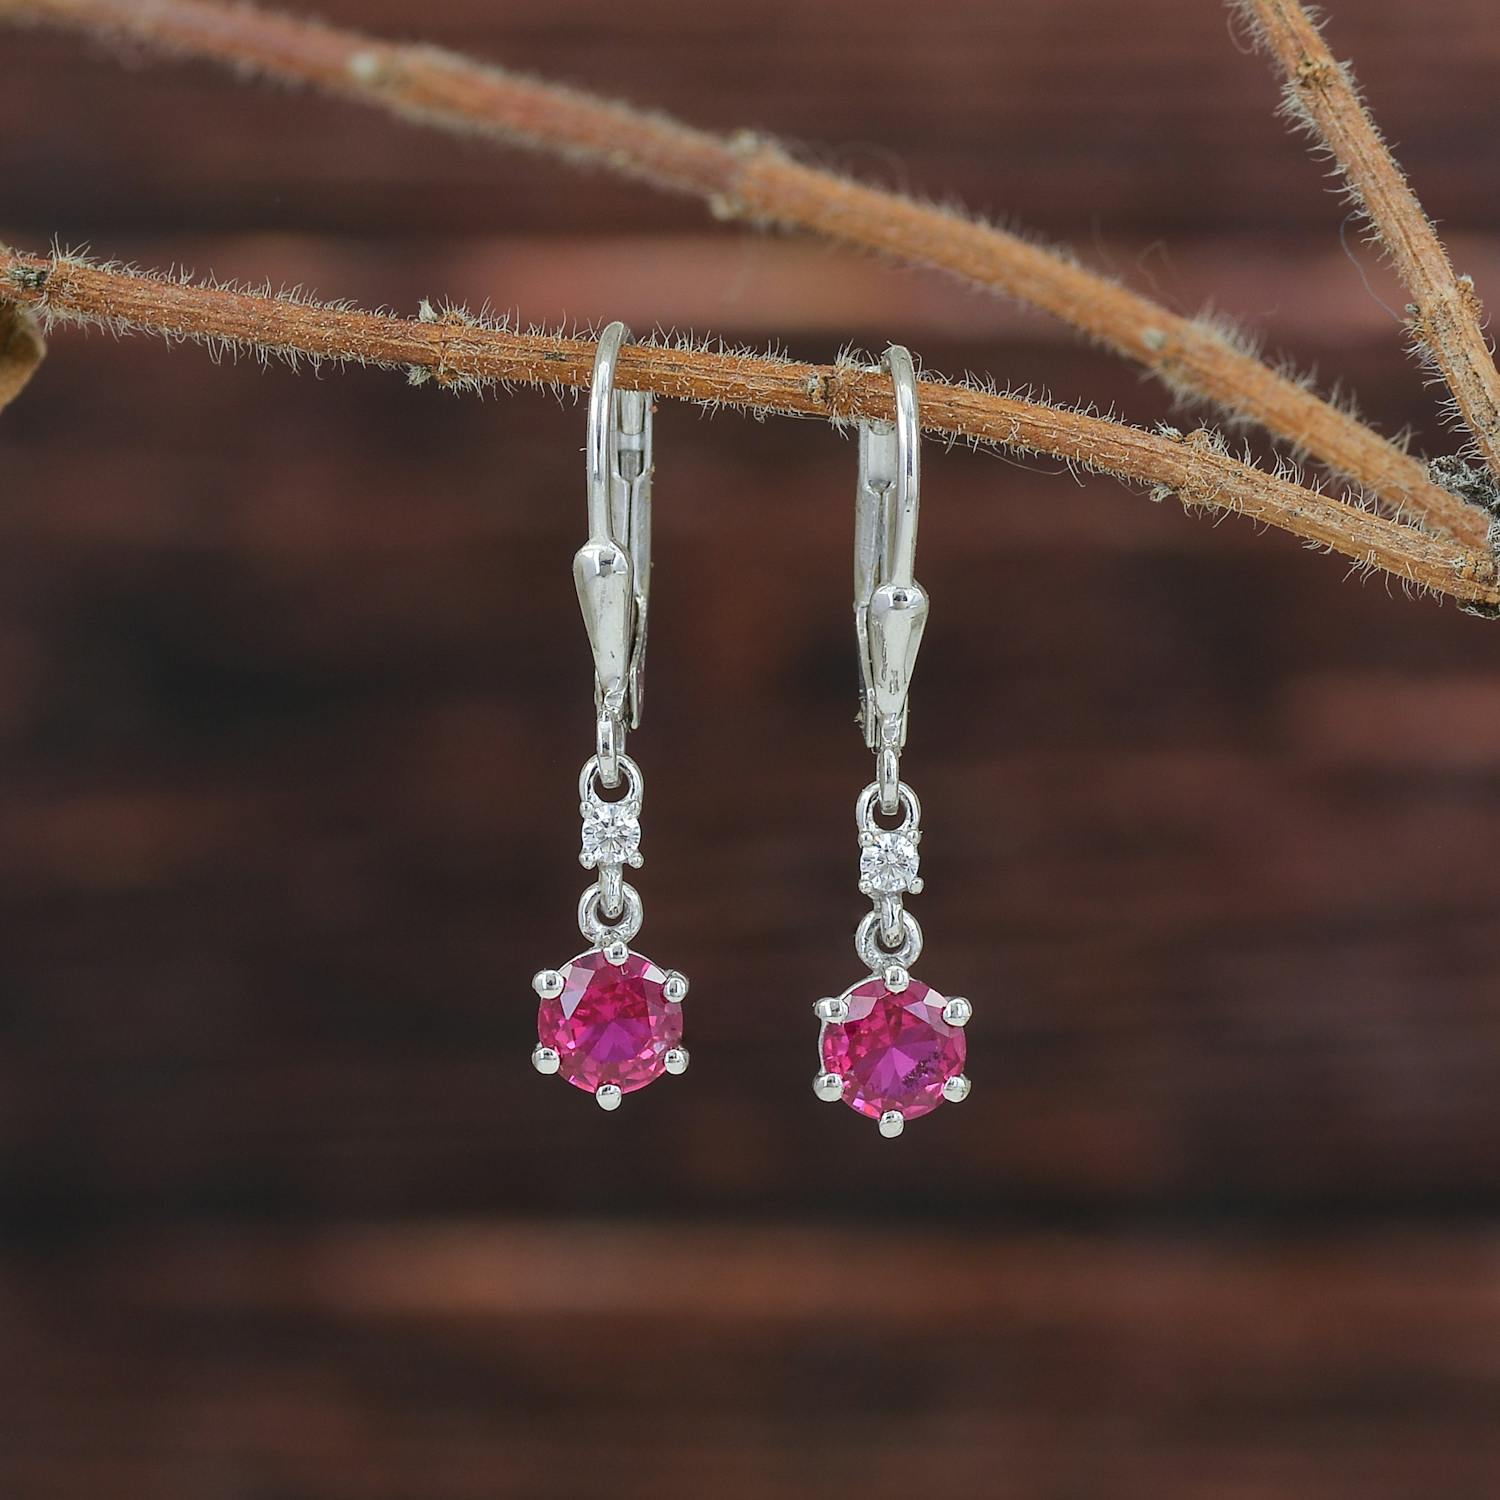 Close-up of Silver Earrings with Pink Gem Stones · Free Stock Photo